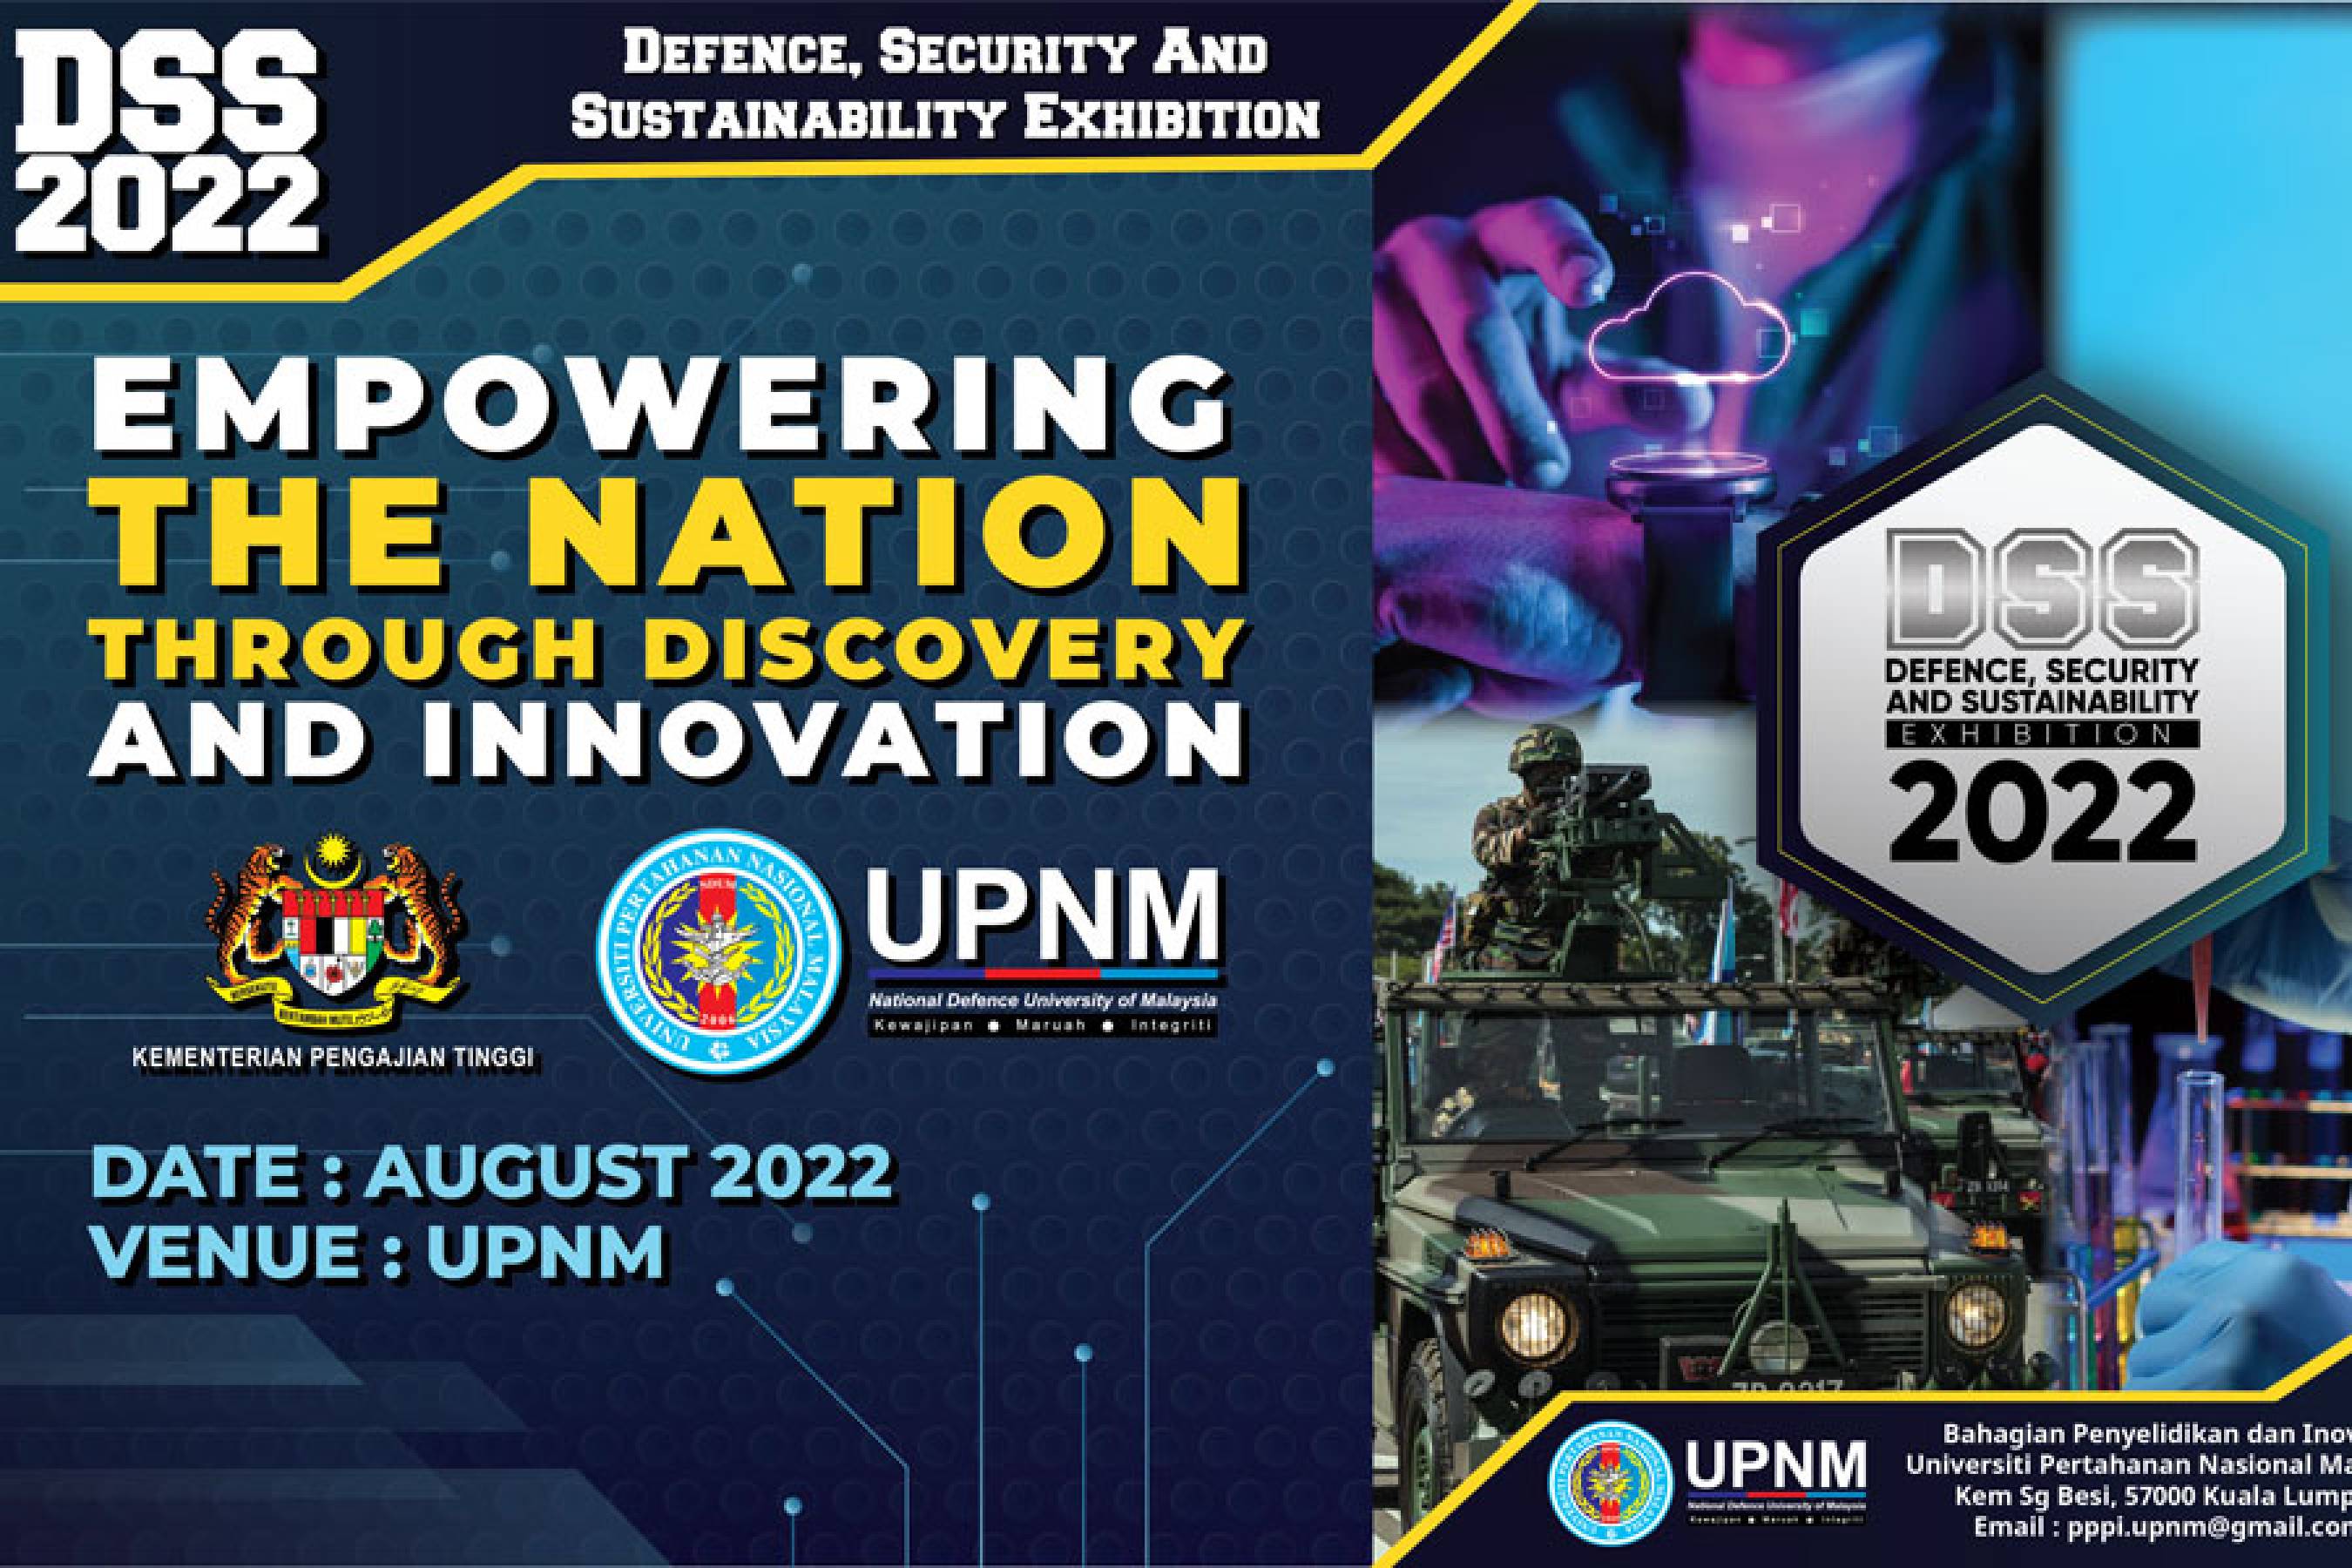 Defence, Security and Sustainability Exhibition 2022 (DSS 2022), Peringkat UPNM